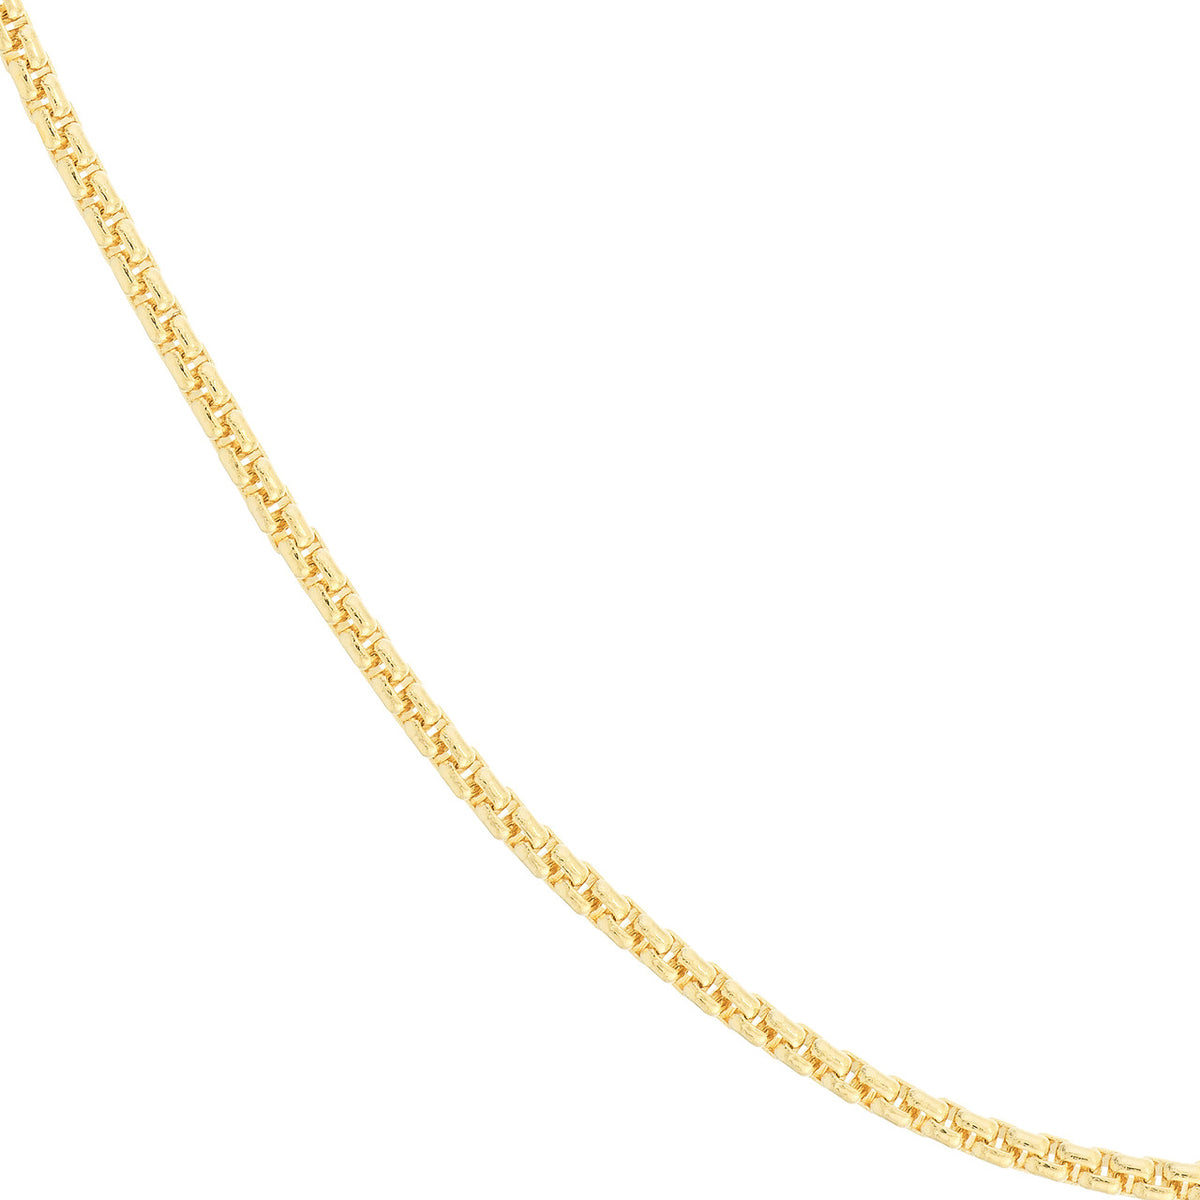 14K Yellow Gold 1.75mm Solid Round Box Chain Necklace with Lobster Lock